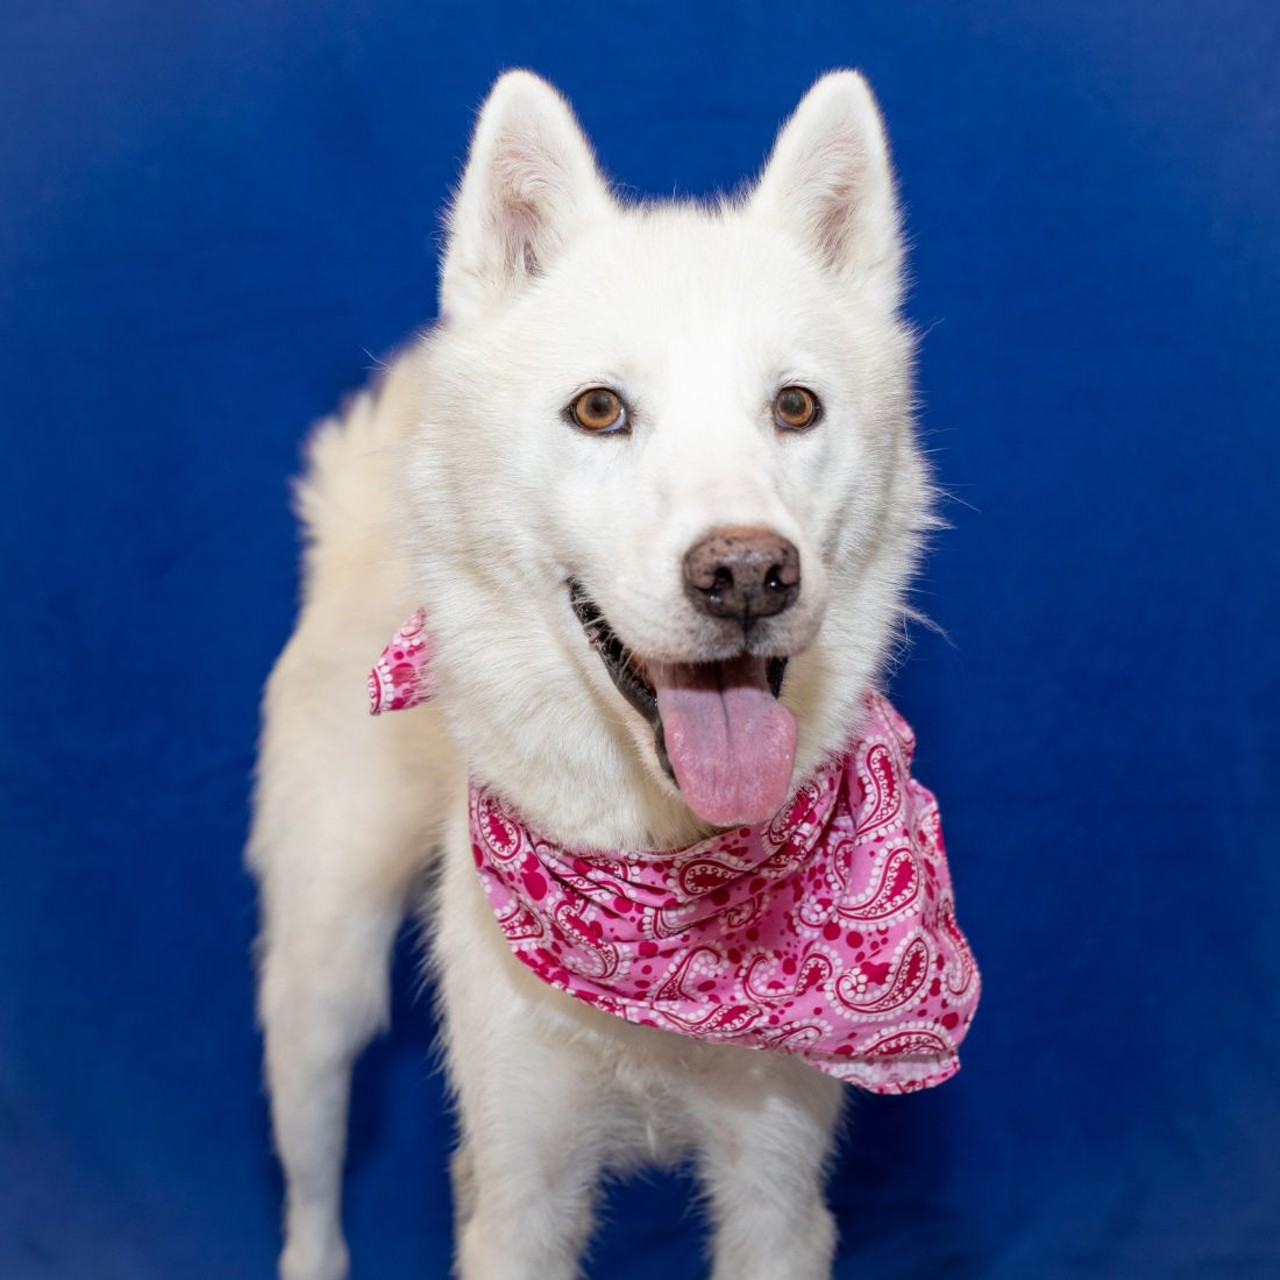 NAME: Stardust
GENDER:  Female
BREED:  Siberian Husky
AGE:  5 years
WEIGHT:  34 pounds
SPECIAL CONSIDERATIONS:  Stardust may do best in a home with older or no children. As with most Huskies, she also enjoys howling and barking.
REASON I CAME TO MHS:  Homeless in Westland
LOCATION:  Rochester Hills Center for Animal Care
ID NUMBER:  871283